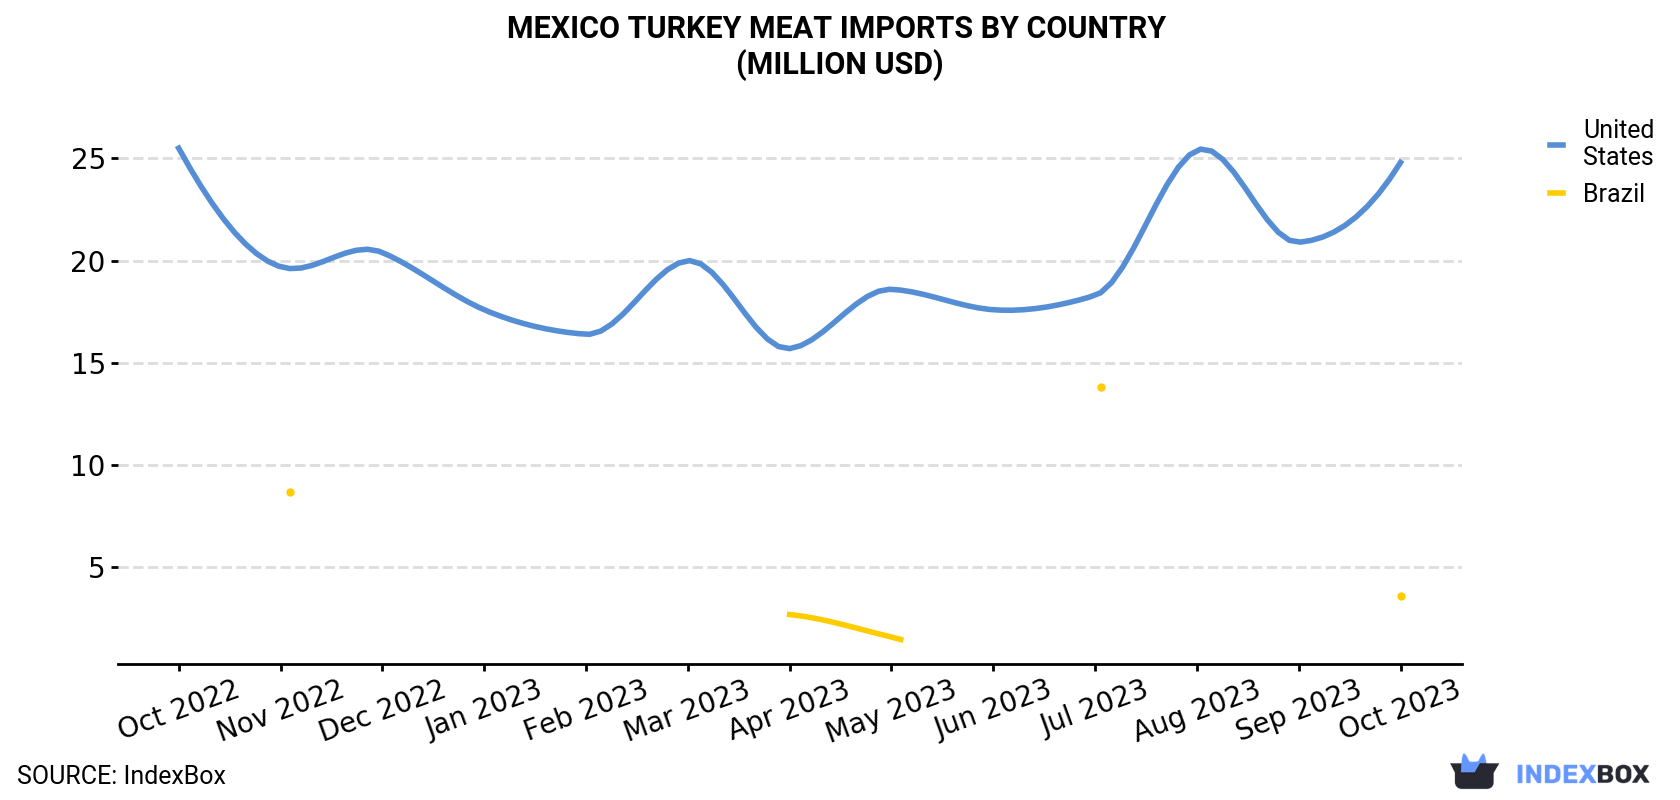 Mexico Turkey Meat Imports By Country (Million USD)